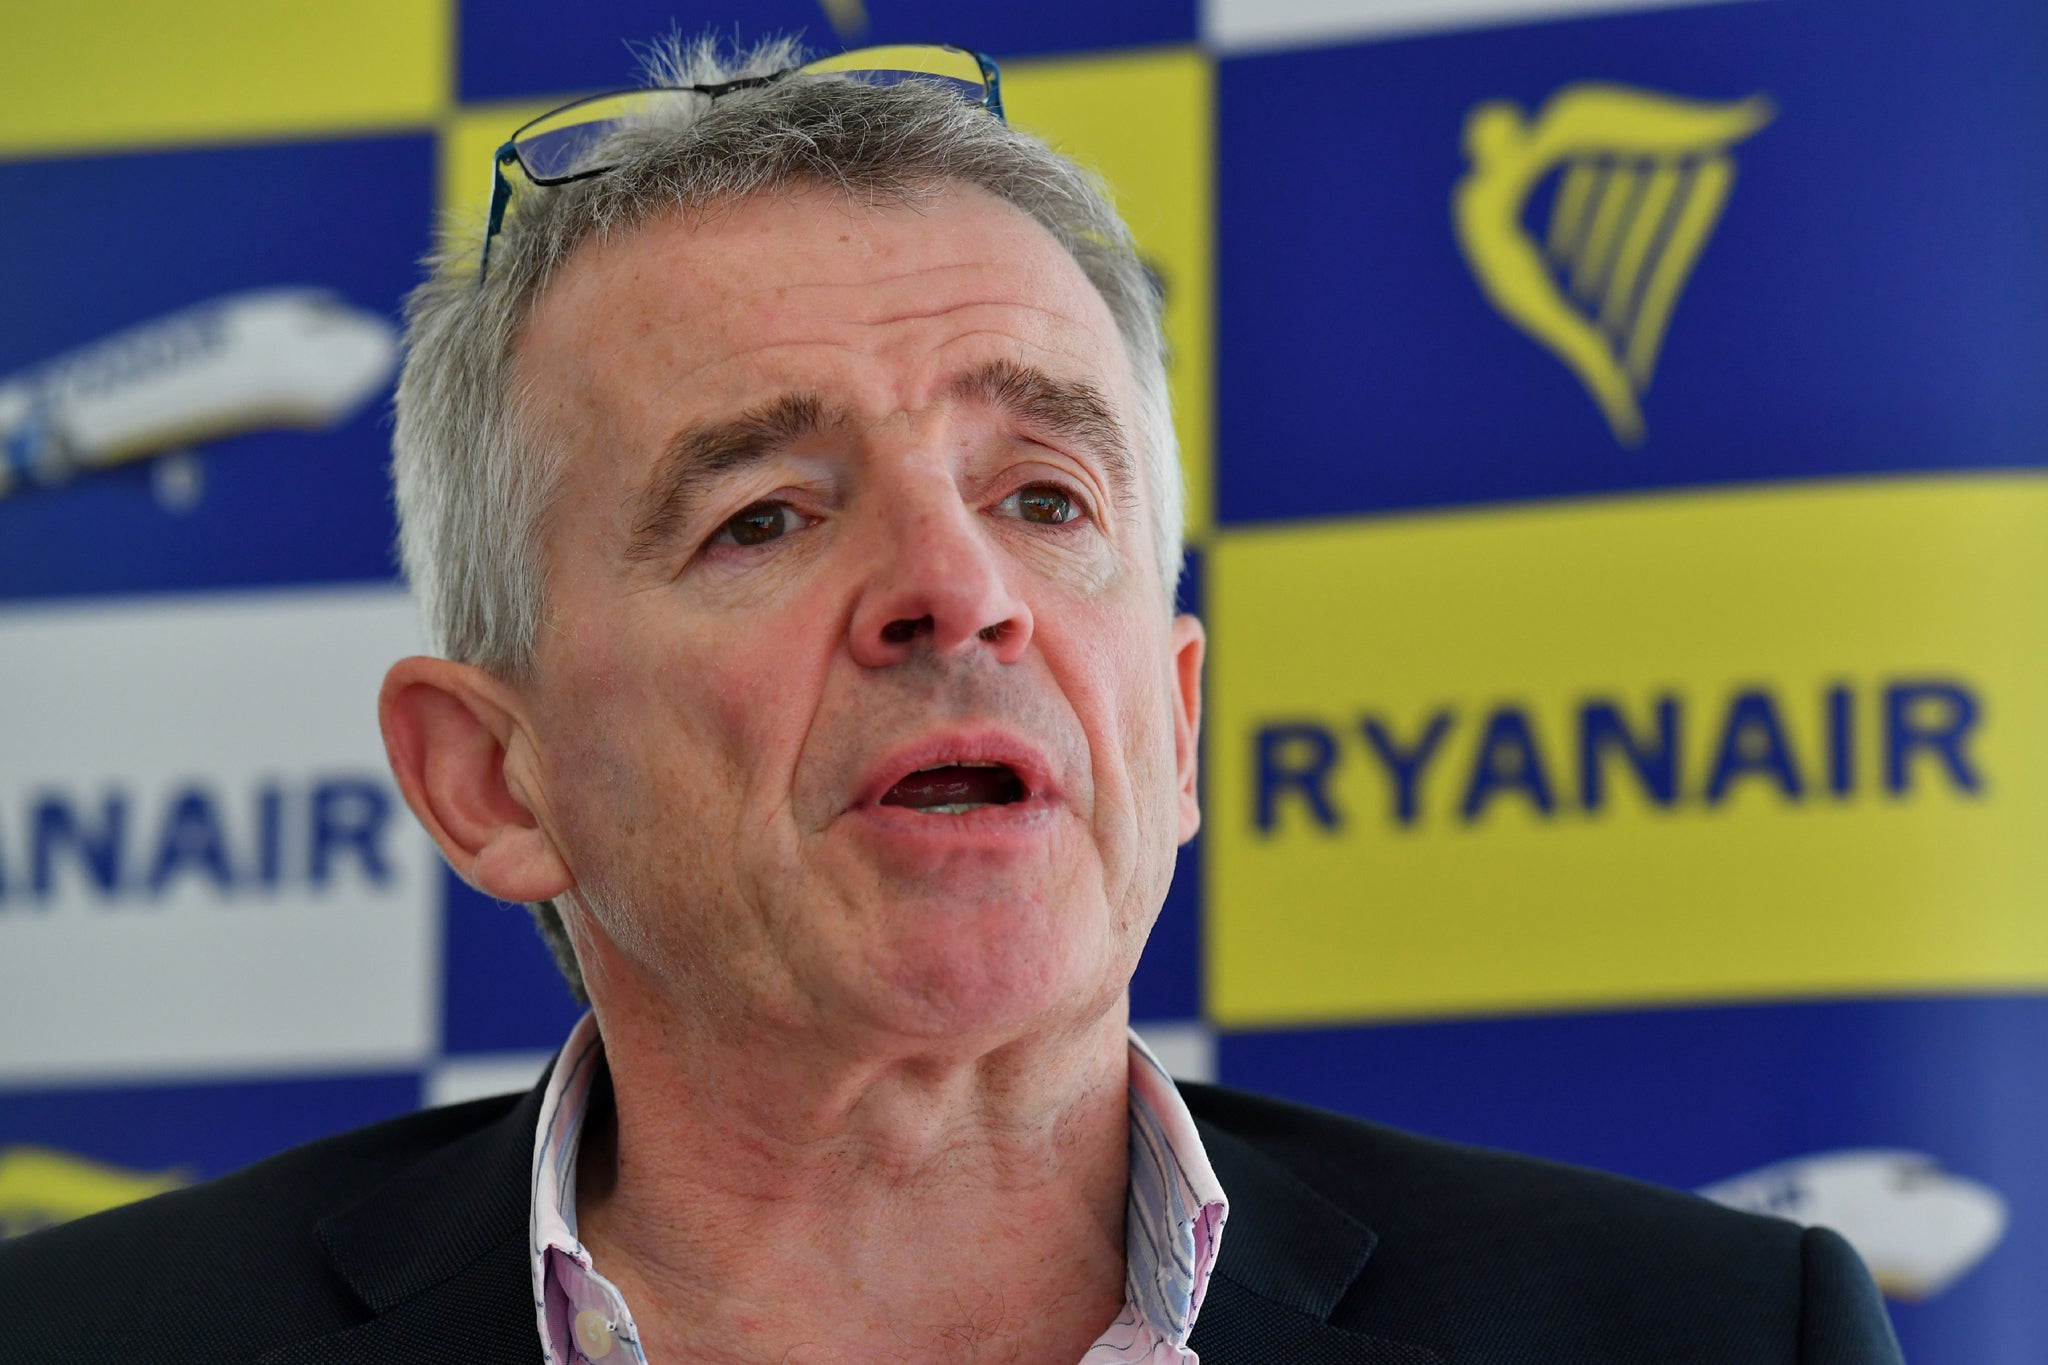 Ryanair CEO Michael O'Leary is looking for someone with an 'aversion to bolloxology'